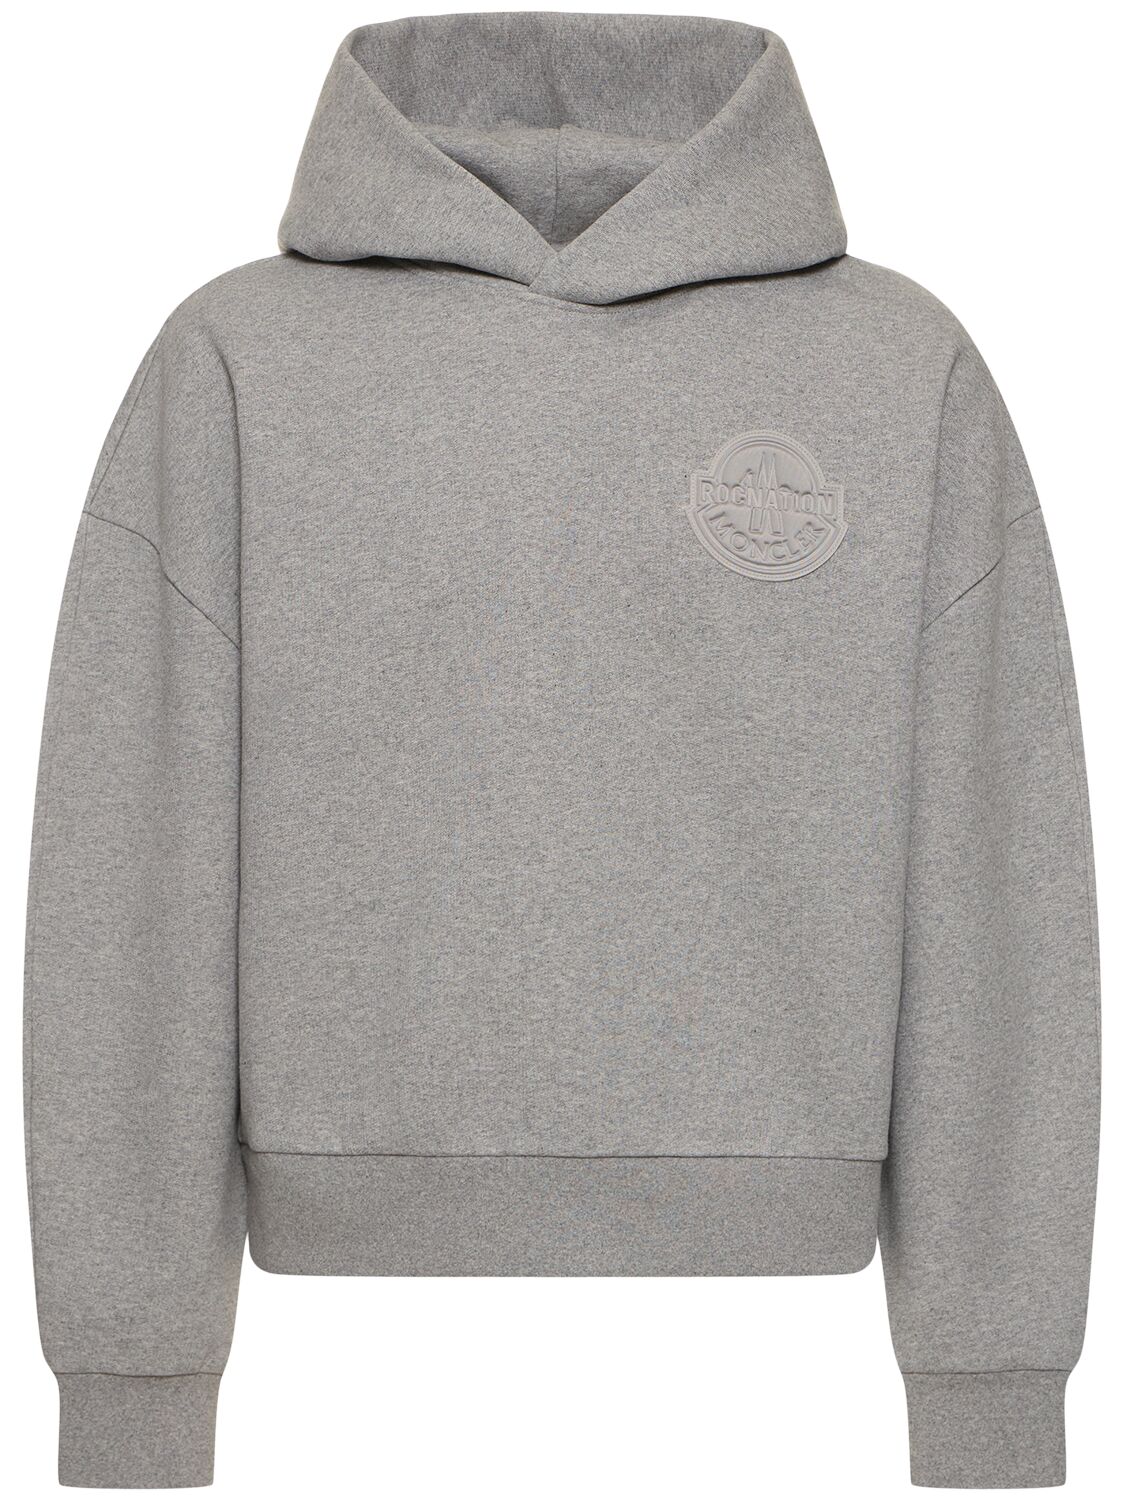 Moncler Genius Moncler X Roc Nation Designed By Jay-z In Gray